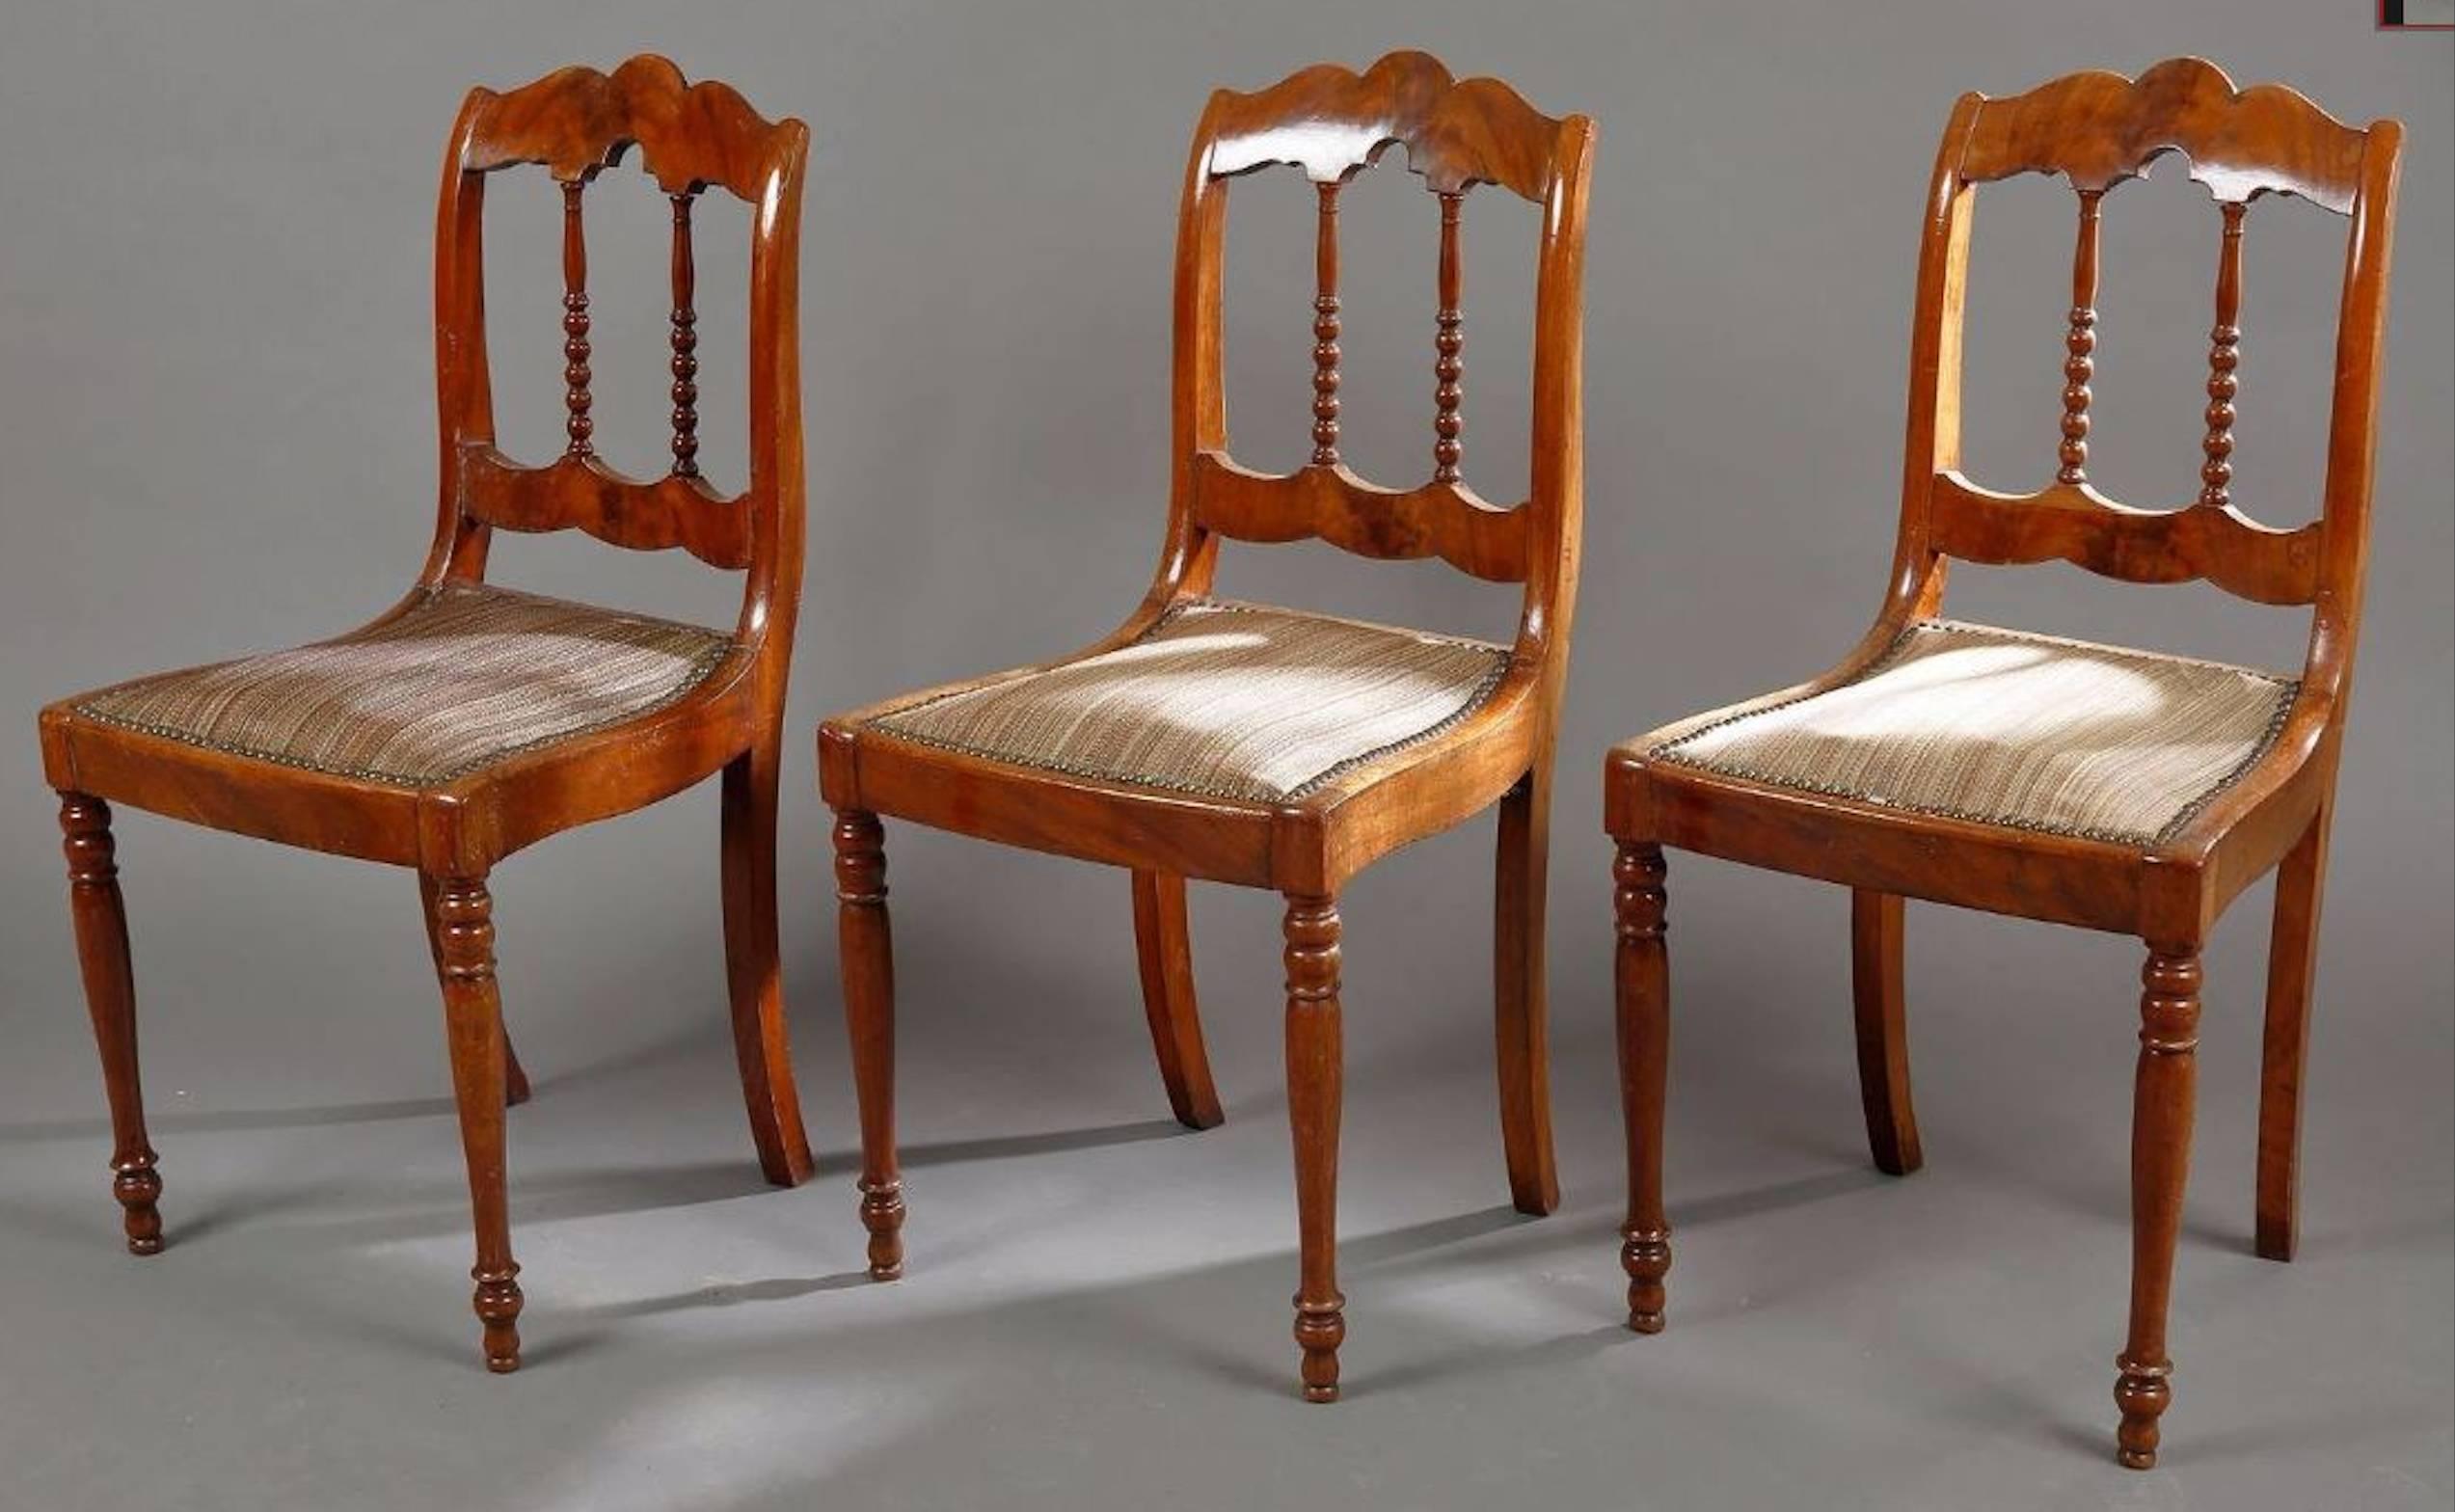 Set of three mahogany chairs with open backs resting on carved feet.
France, circa 1890.